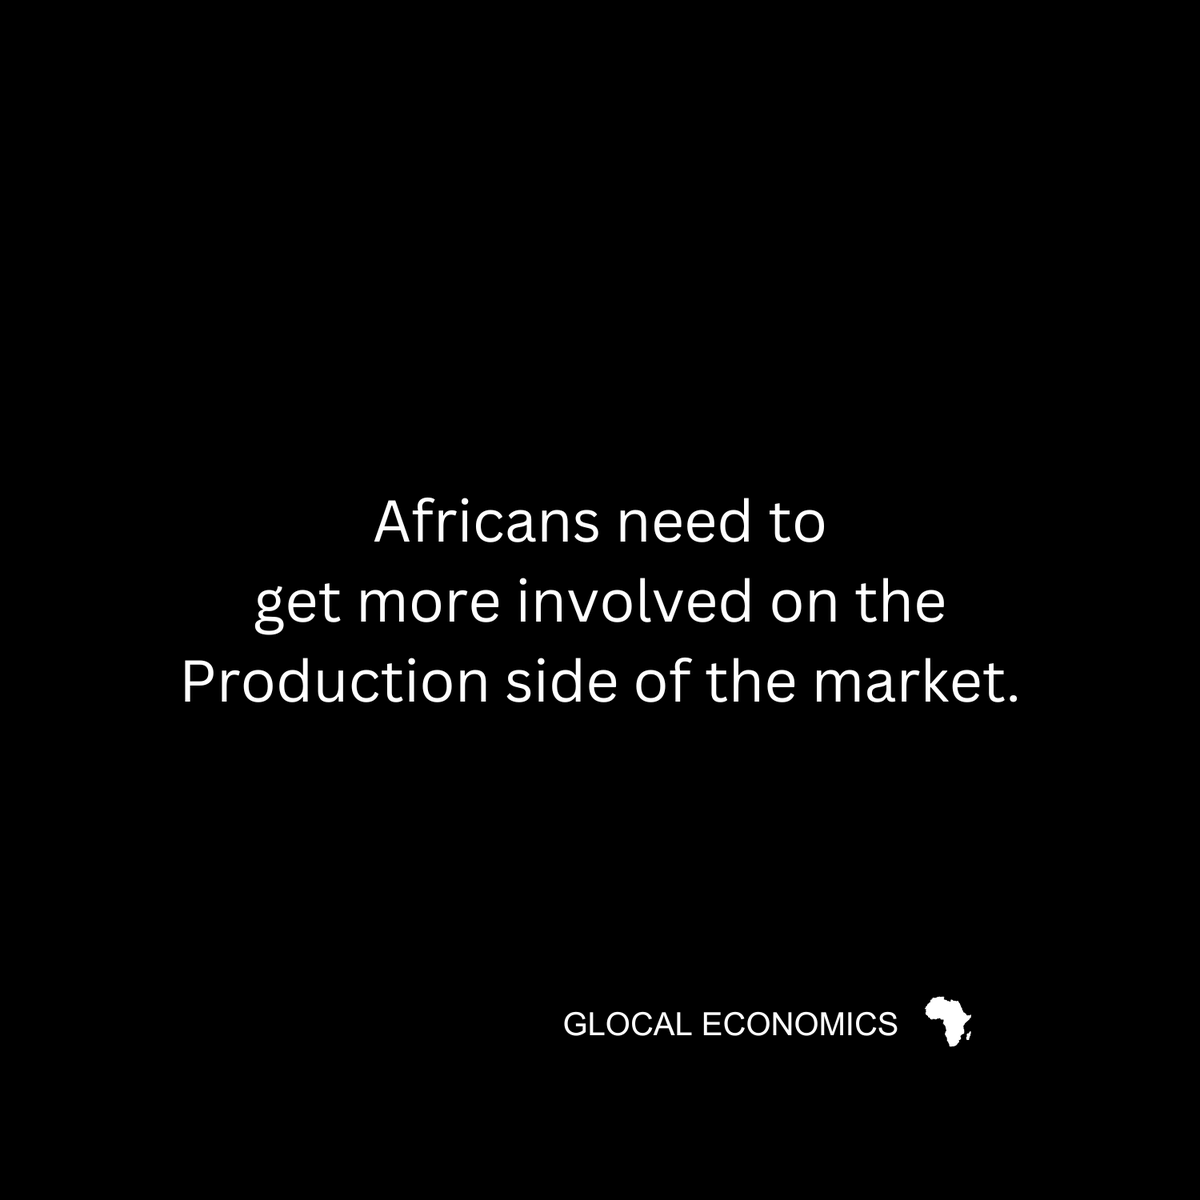 Our fate will not change without the following: we must become Producers.
We must be involved in every form of production: Scientific, Industrial, Intellectual, Agricultural, Technological.
Everything we consume, we must produce. First step.
#africandiaspora #africa #production